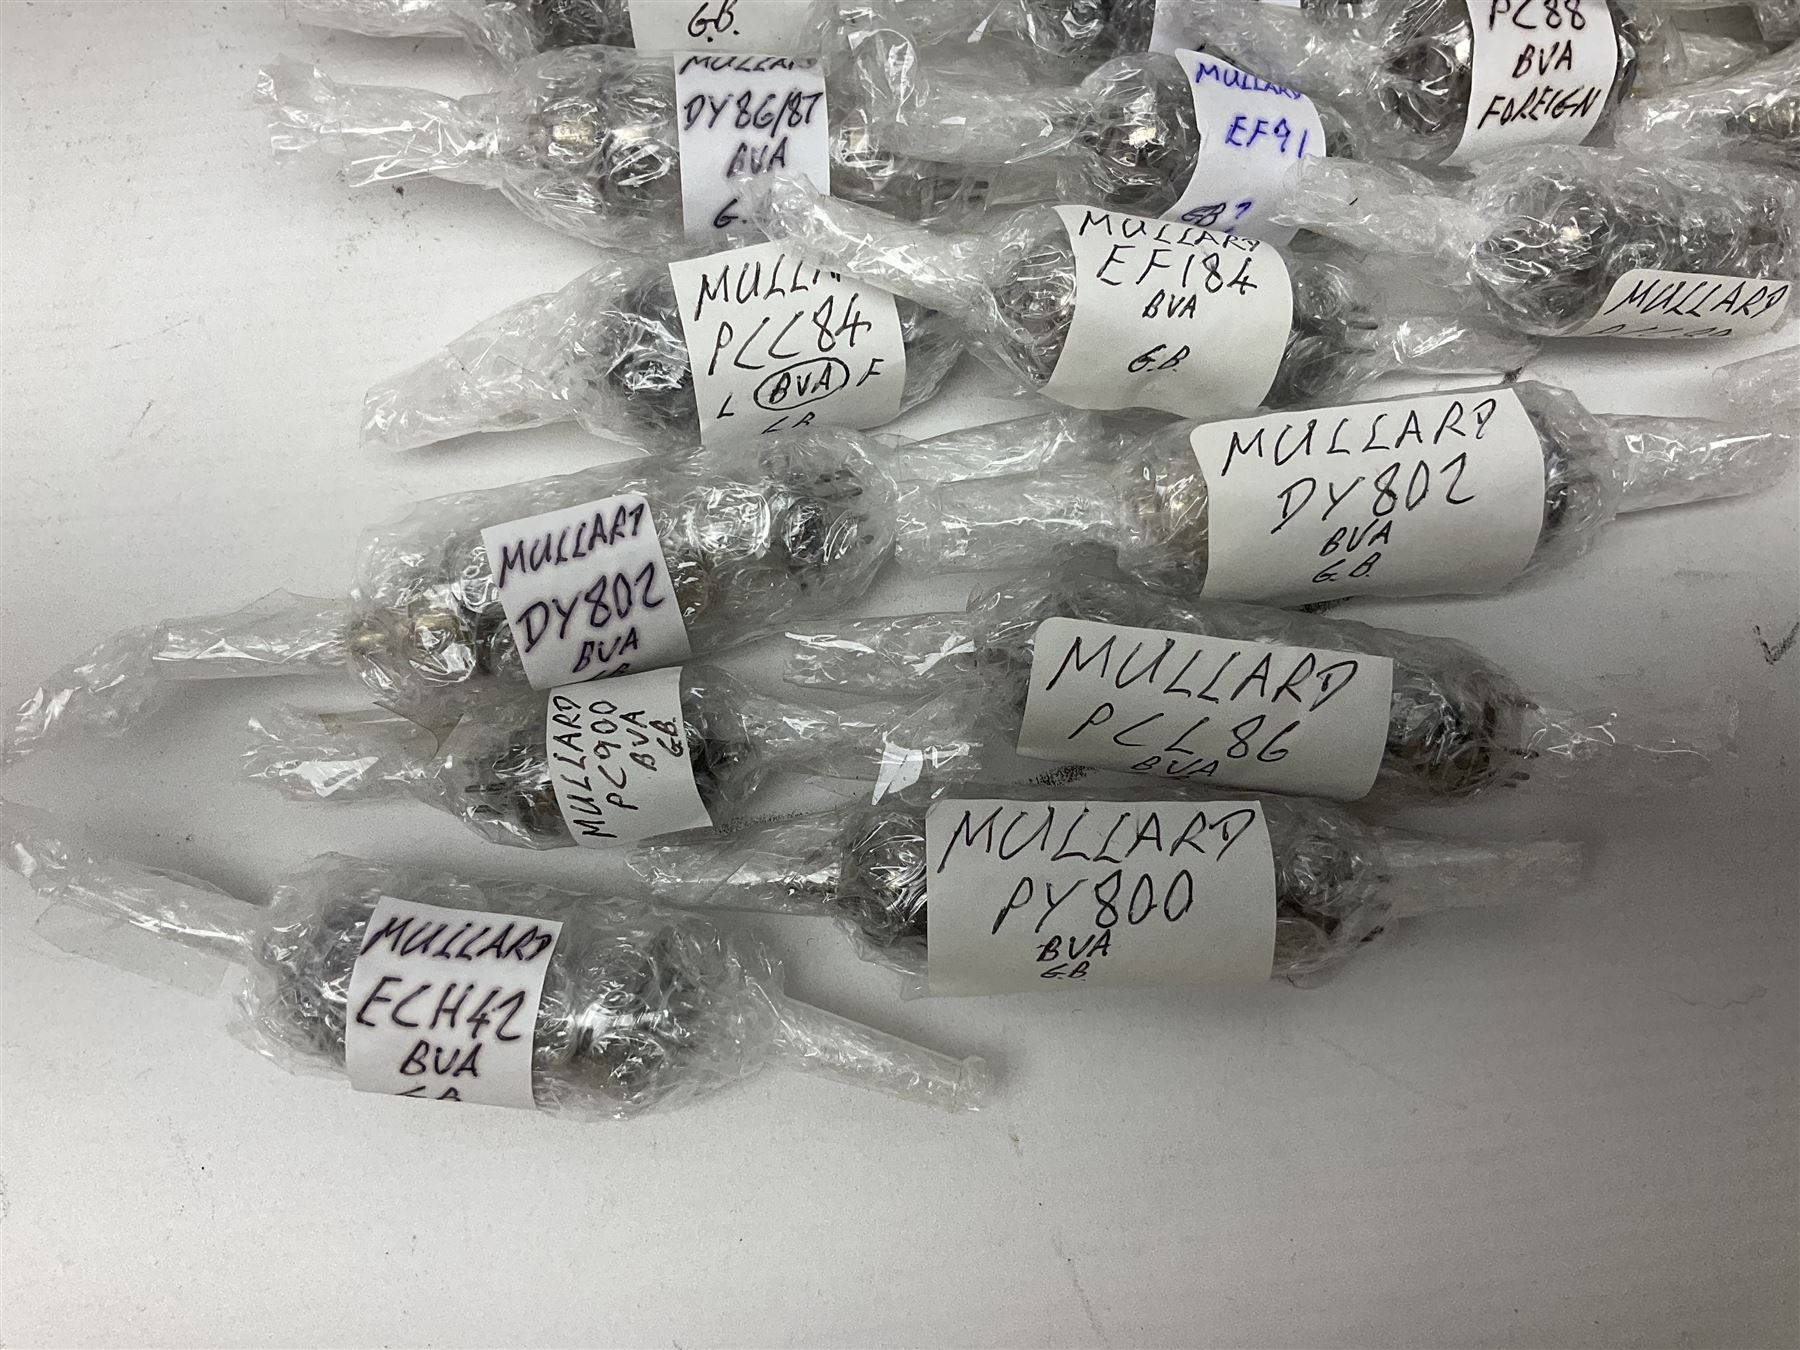 Collection of Mullard thermionic radio valves/vacuum tubes - Image 9 of 14